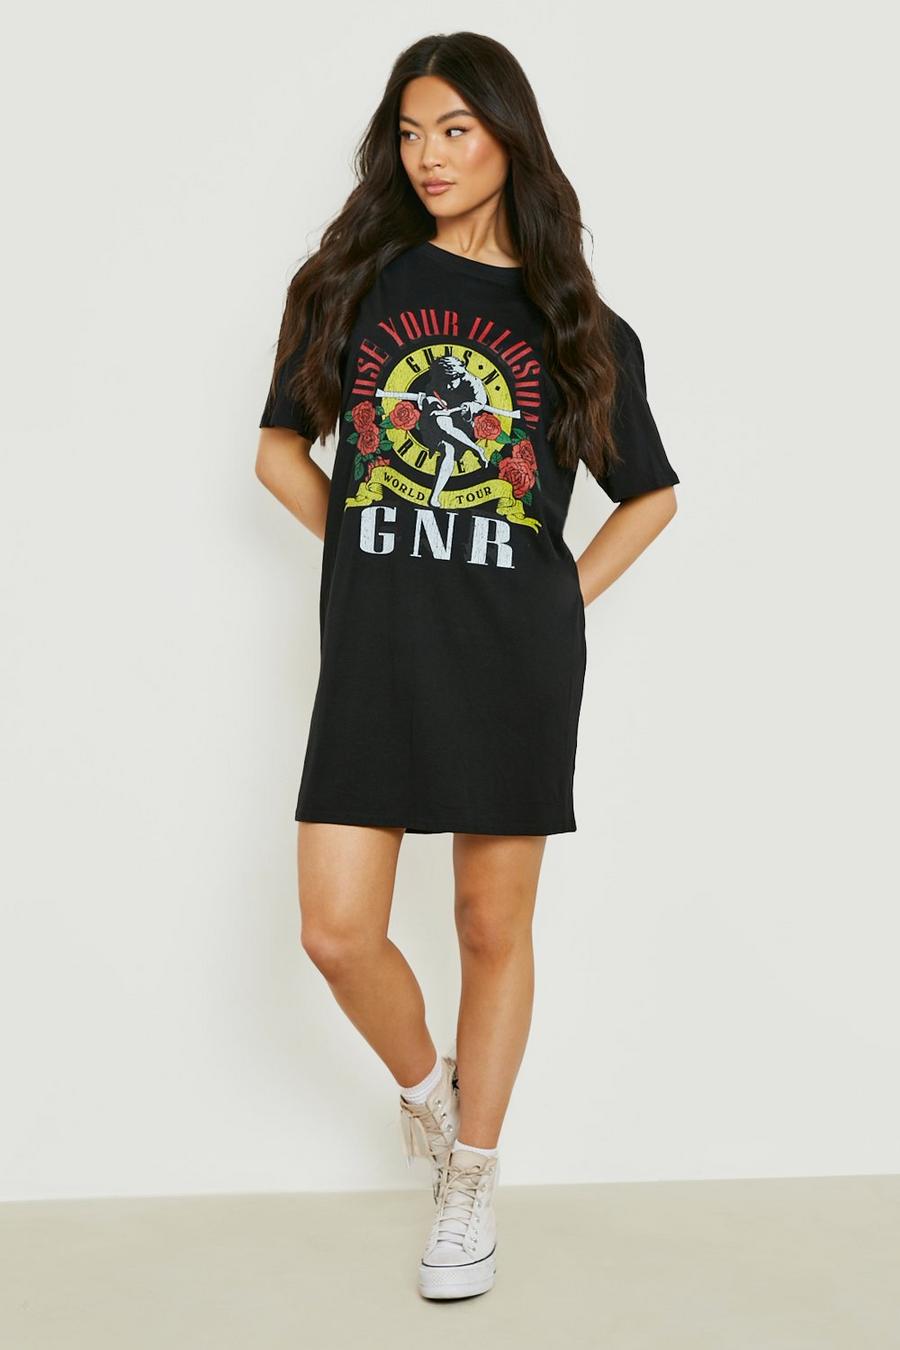 Vestito T-shirt ufficiale con stampa Guns N Roses, Black negro image number 1